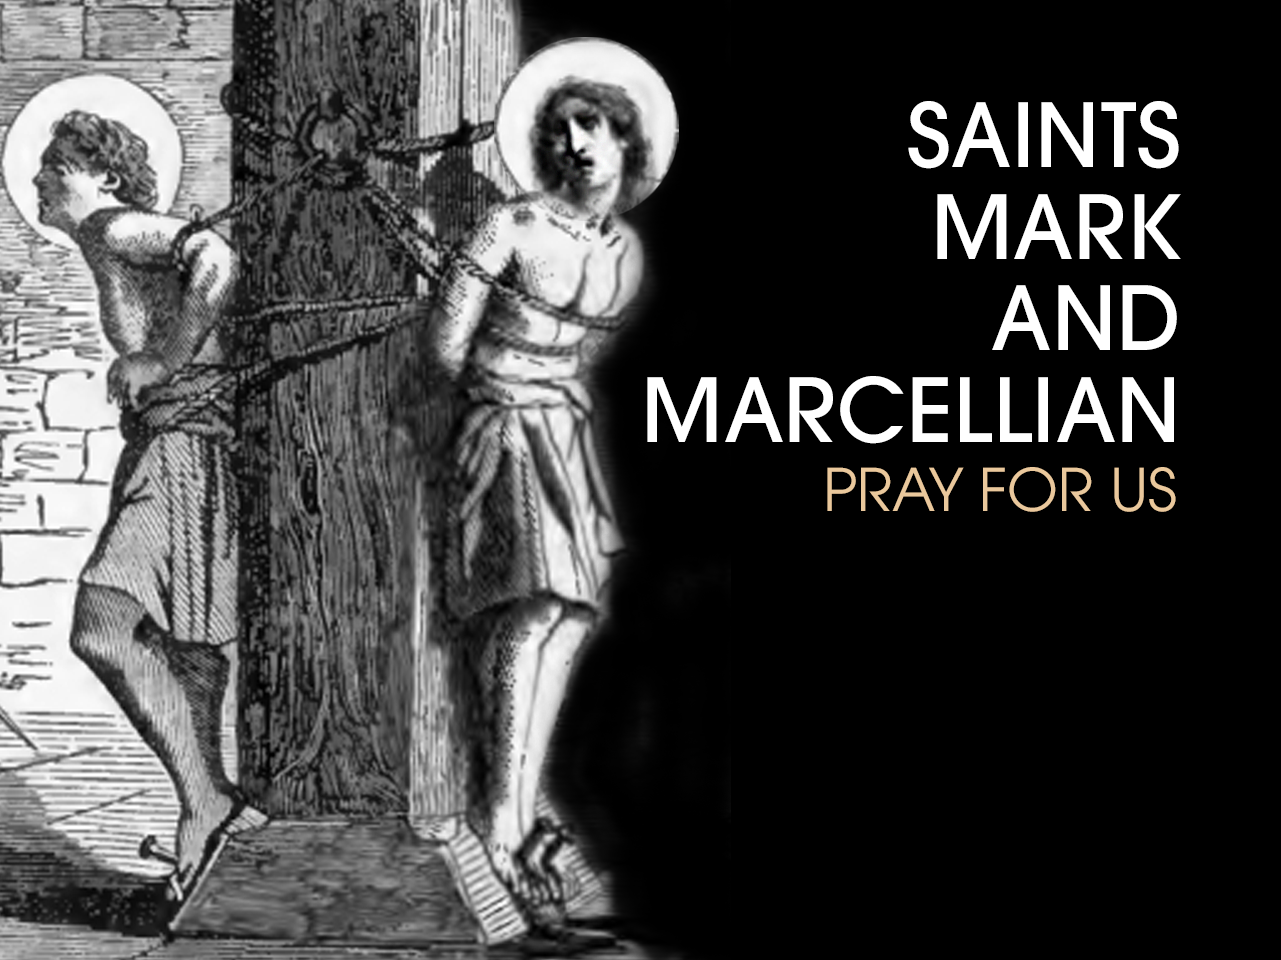 Sts. Mark & Marcellian